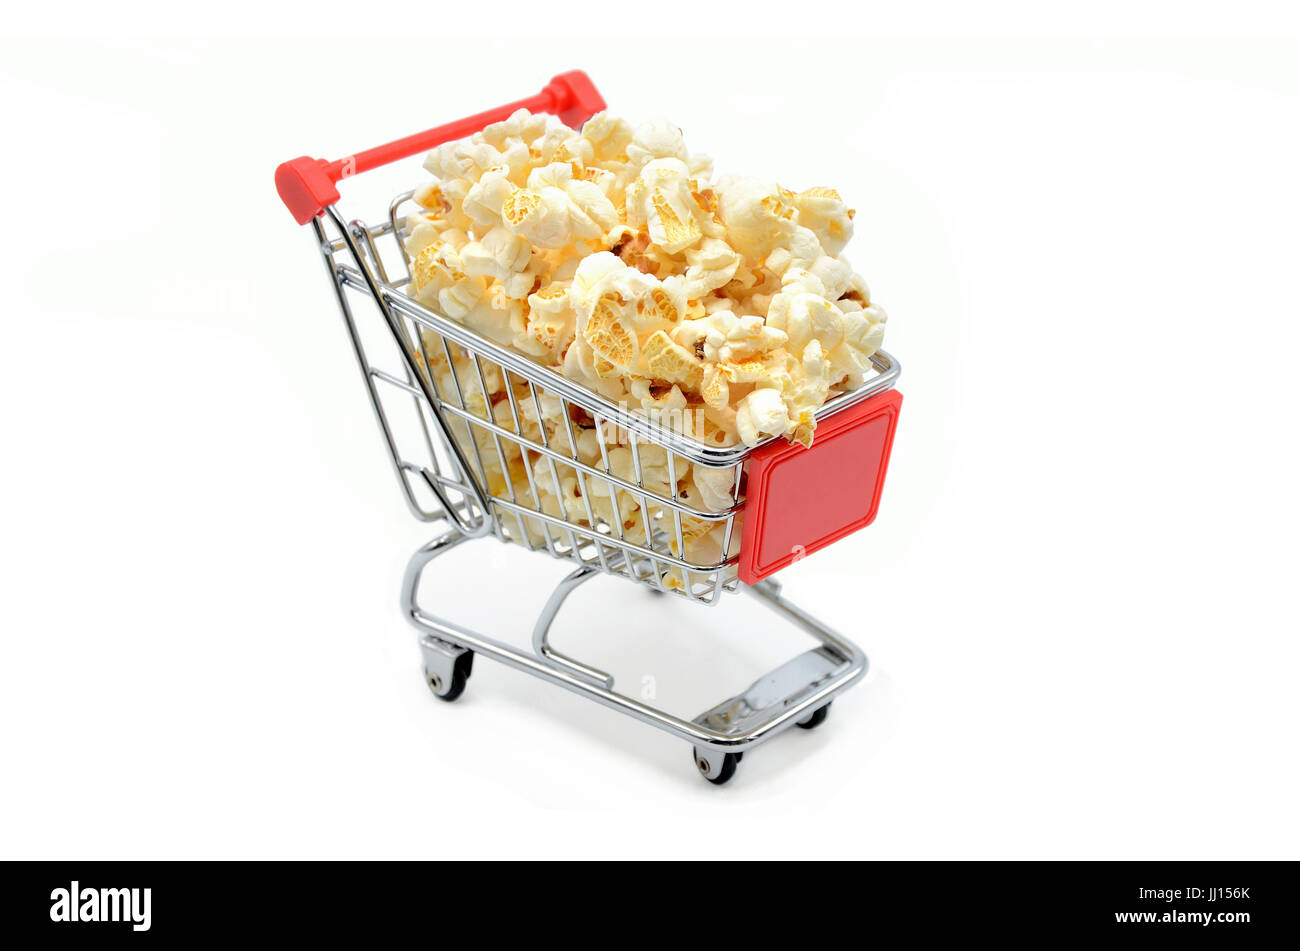 shopping cart with popcorn Stock Photo